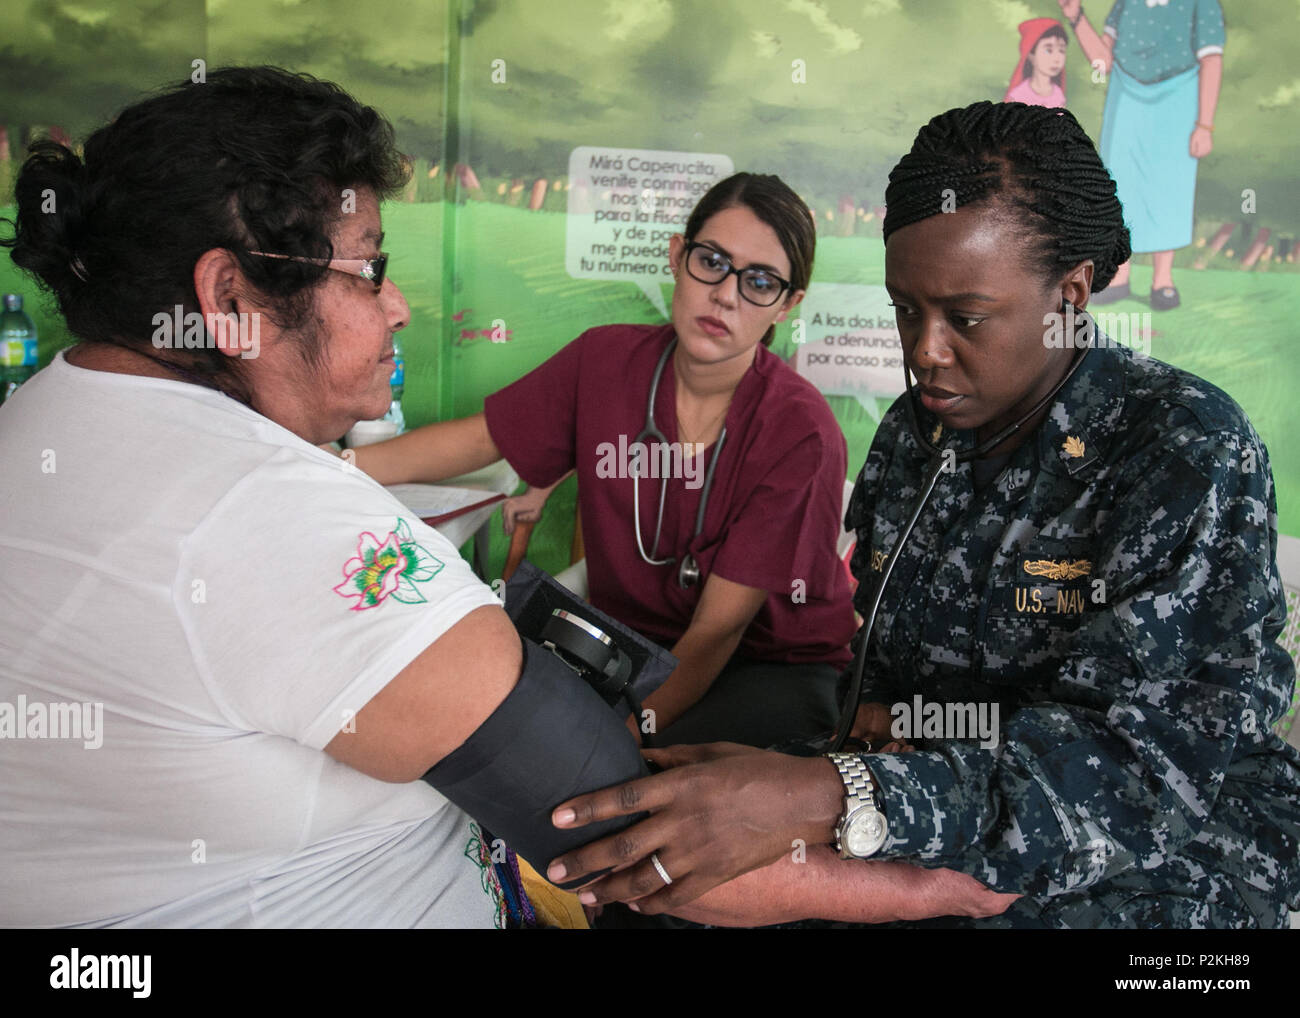 AHUACHAPAN, El Salvador (Sep. 8, 2016) – U.S. Navy Lt. Cmdr. Ebony Ferguson, a clinical nurse specialist assigned to Fort Belvoir, assists Dr. Gabriela Menjivar M.D., a health worker with Operation Blessing’s Medical Brigade, check a patient’s vitals at a temporary treatment site in Ahuachapán, El Salvador during Southern Partnership Station 2016 (SPS-16).  Operation Blessing’s Medical Brigade is a non-for-profit mobile patient care unit established to provide medical service to those affected by natural disaster and render aid to rural areas. SPS-16 is an annual series of U.S. Navy deployment Stock Photo